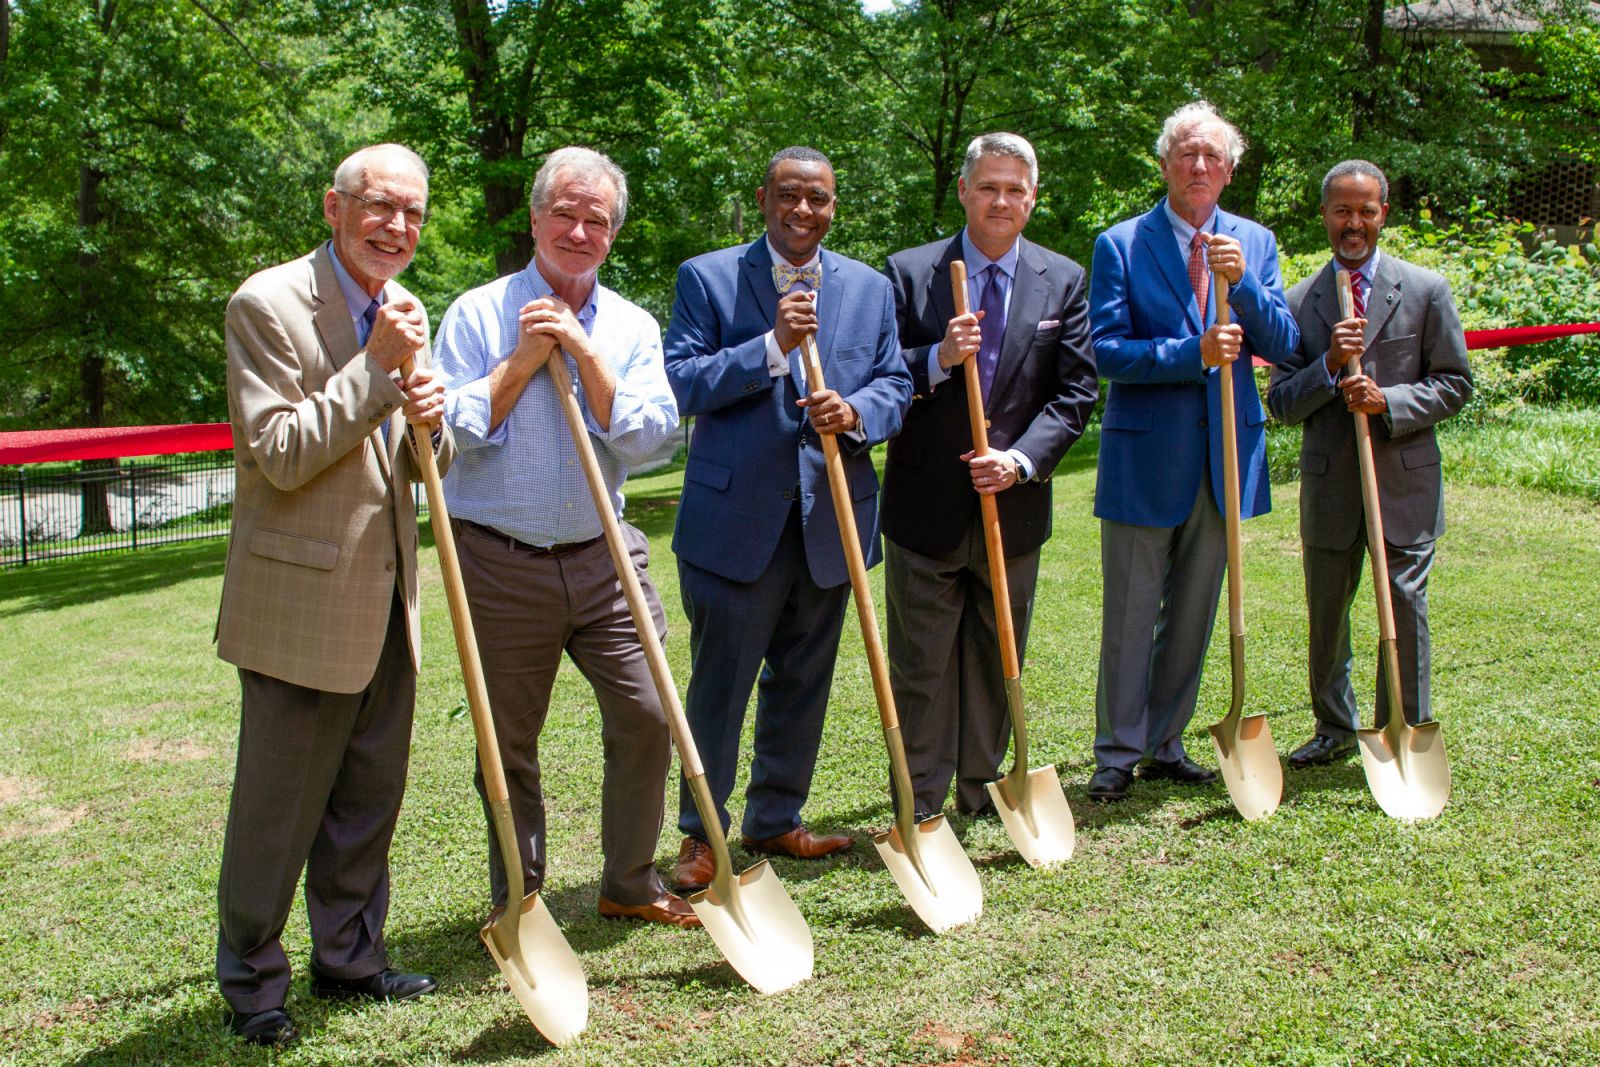 Participating in the groundbreaking of the new music building for the S.C. Governor's School for the Arts and Humanities were, from left, Bruce Halverson, former president; Bob Hughes, board member; LeShown Goodwin, board member; Chad Prosser, board chairman; Peter Parrott, board member and Cedric Adderley, president. (Photo/Provided)